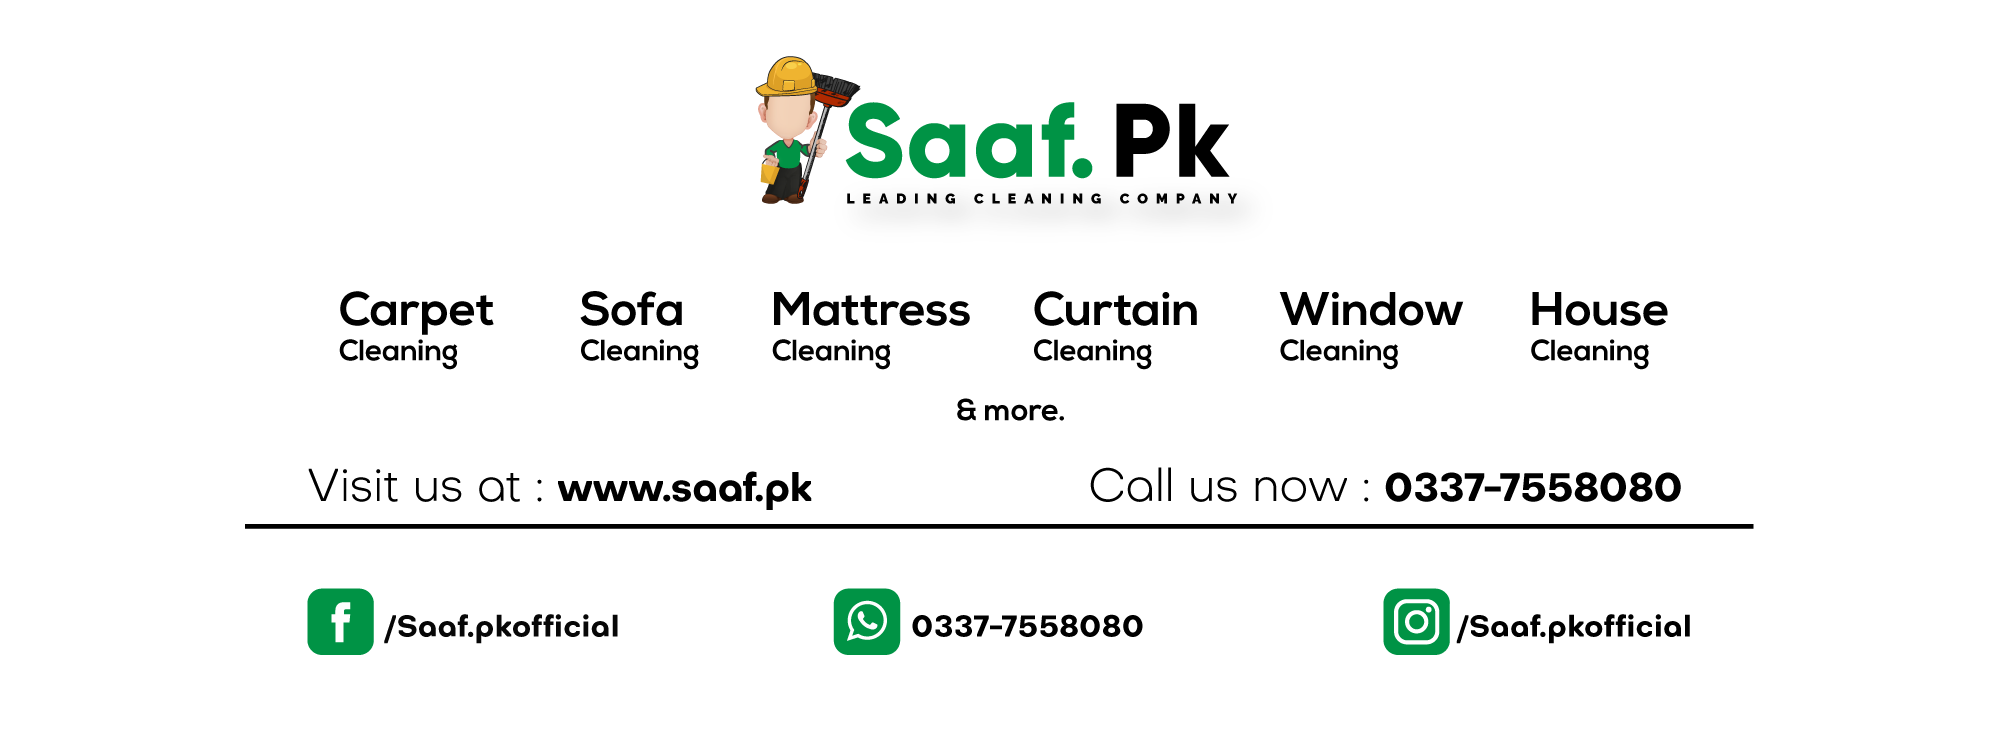 The cleaning services in Karachi